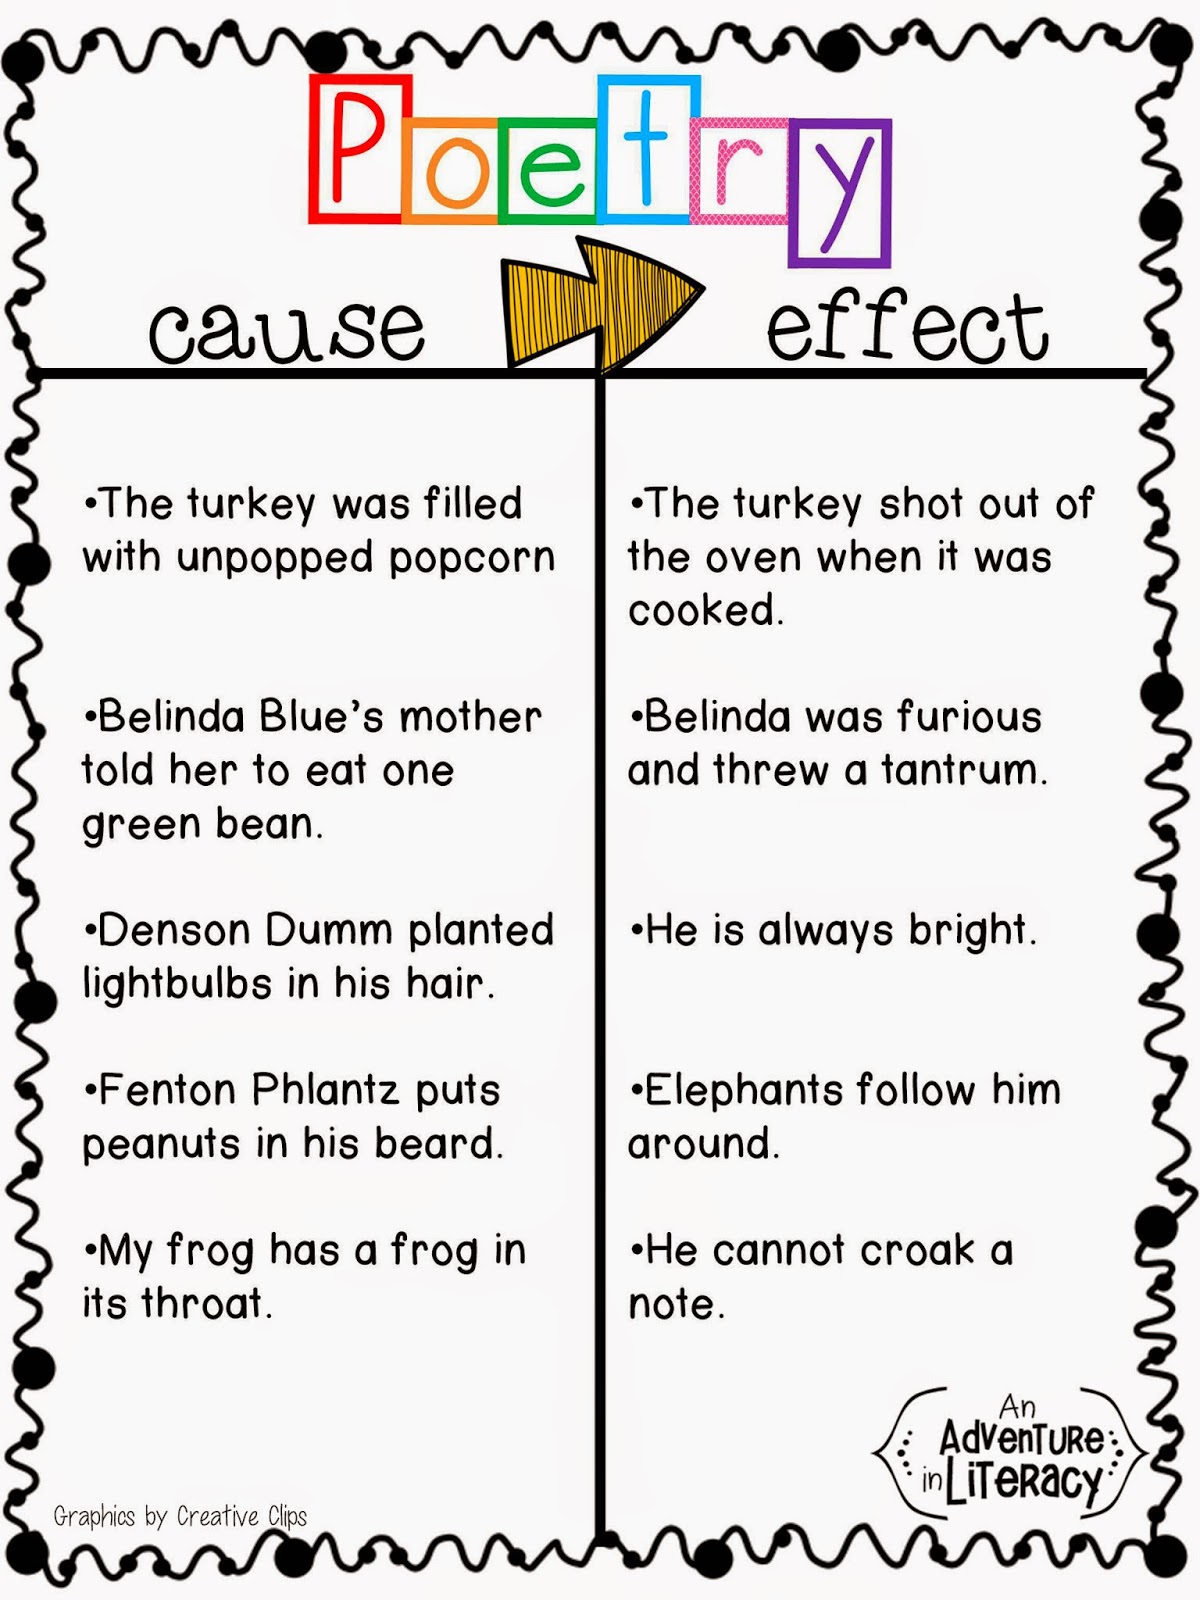 worksheet. Cause And Effect Worksheets For 4th Grade. Worksheet Fun